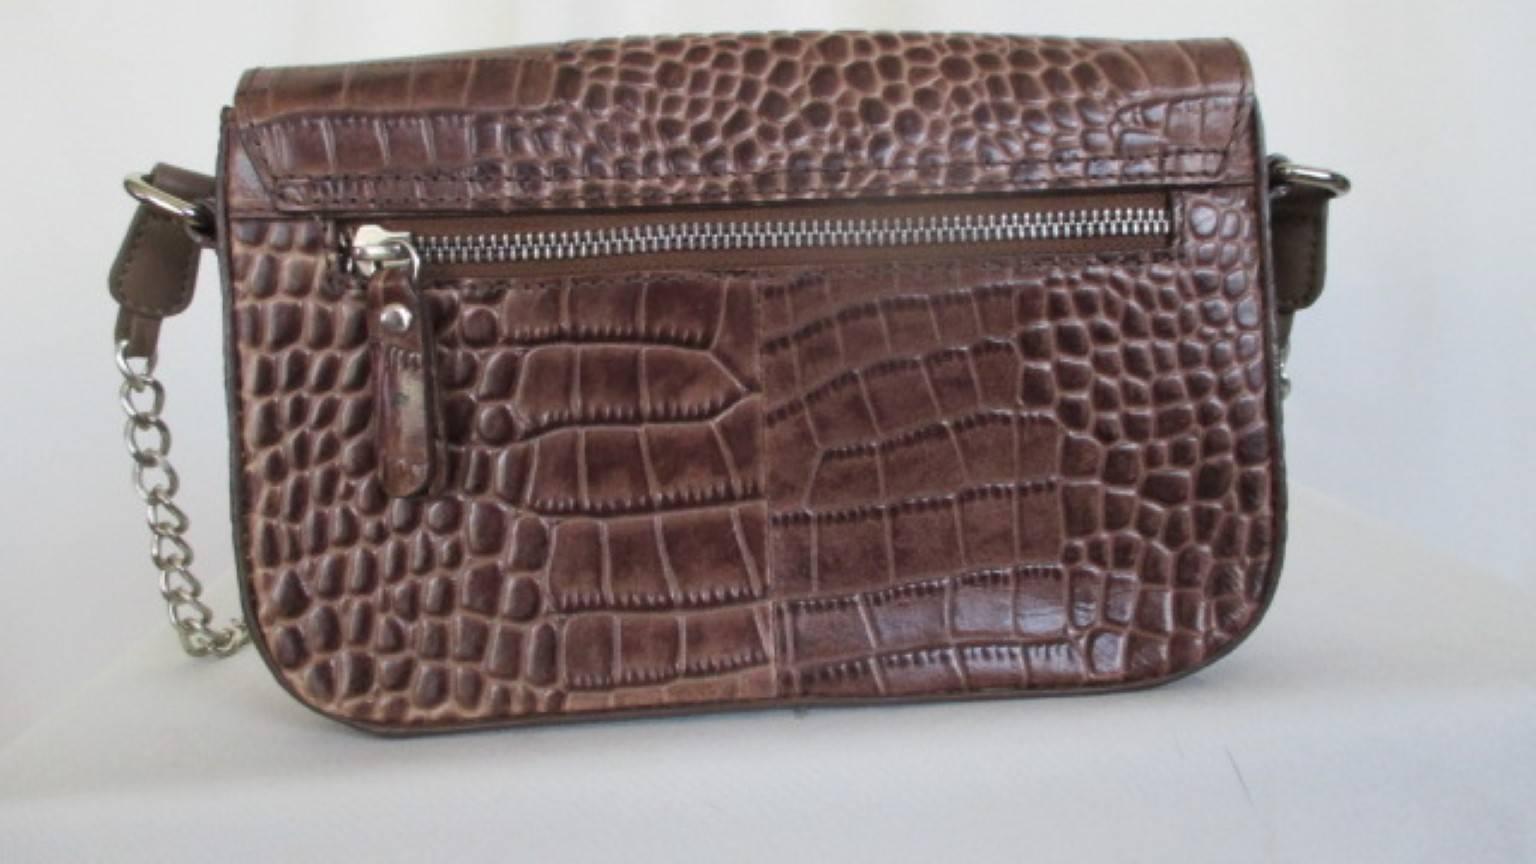 Vintage Guy Laroche bag -collectors item- 
Color and material: brown, croco print leather
Hardware: silver
Inside has 1 zipper and 1 open pocket,
back 1 zipper pocket
Pre owned condition.
Measurements:
15 cm/ 5.90 inch  x  22 cm/ 8.66 inch
Total